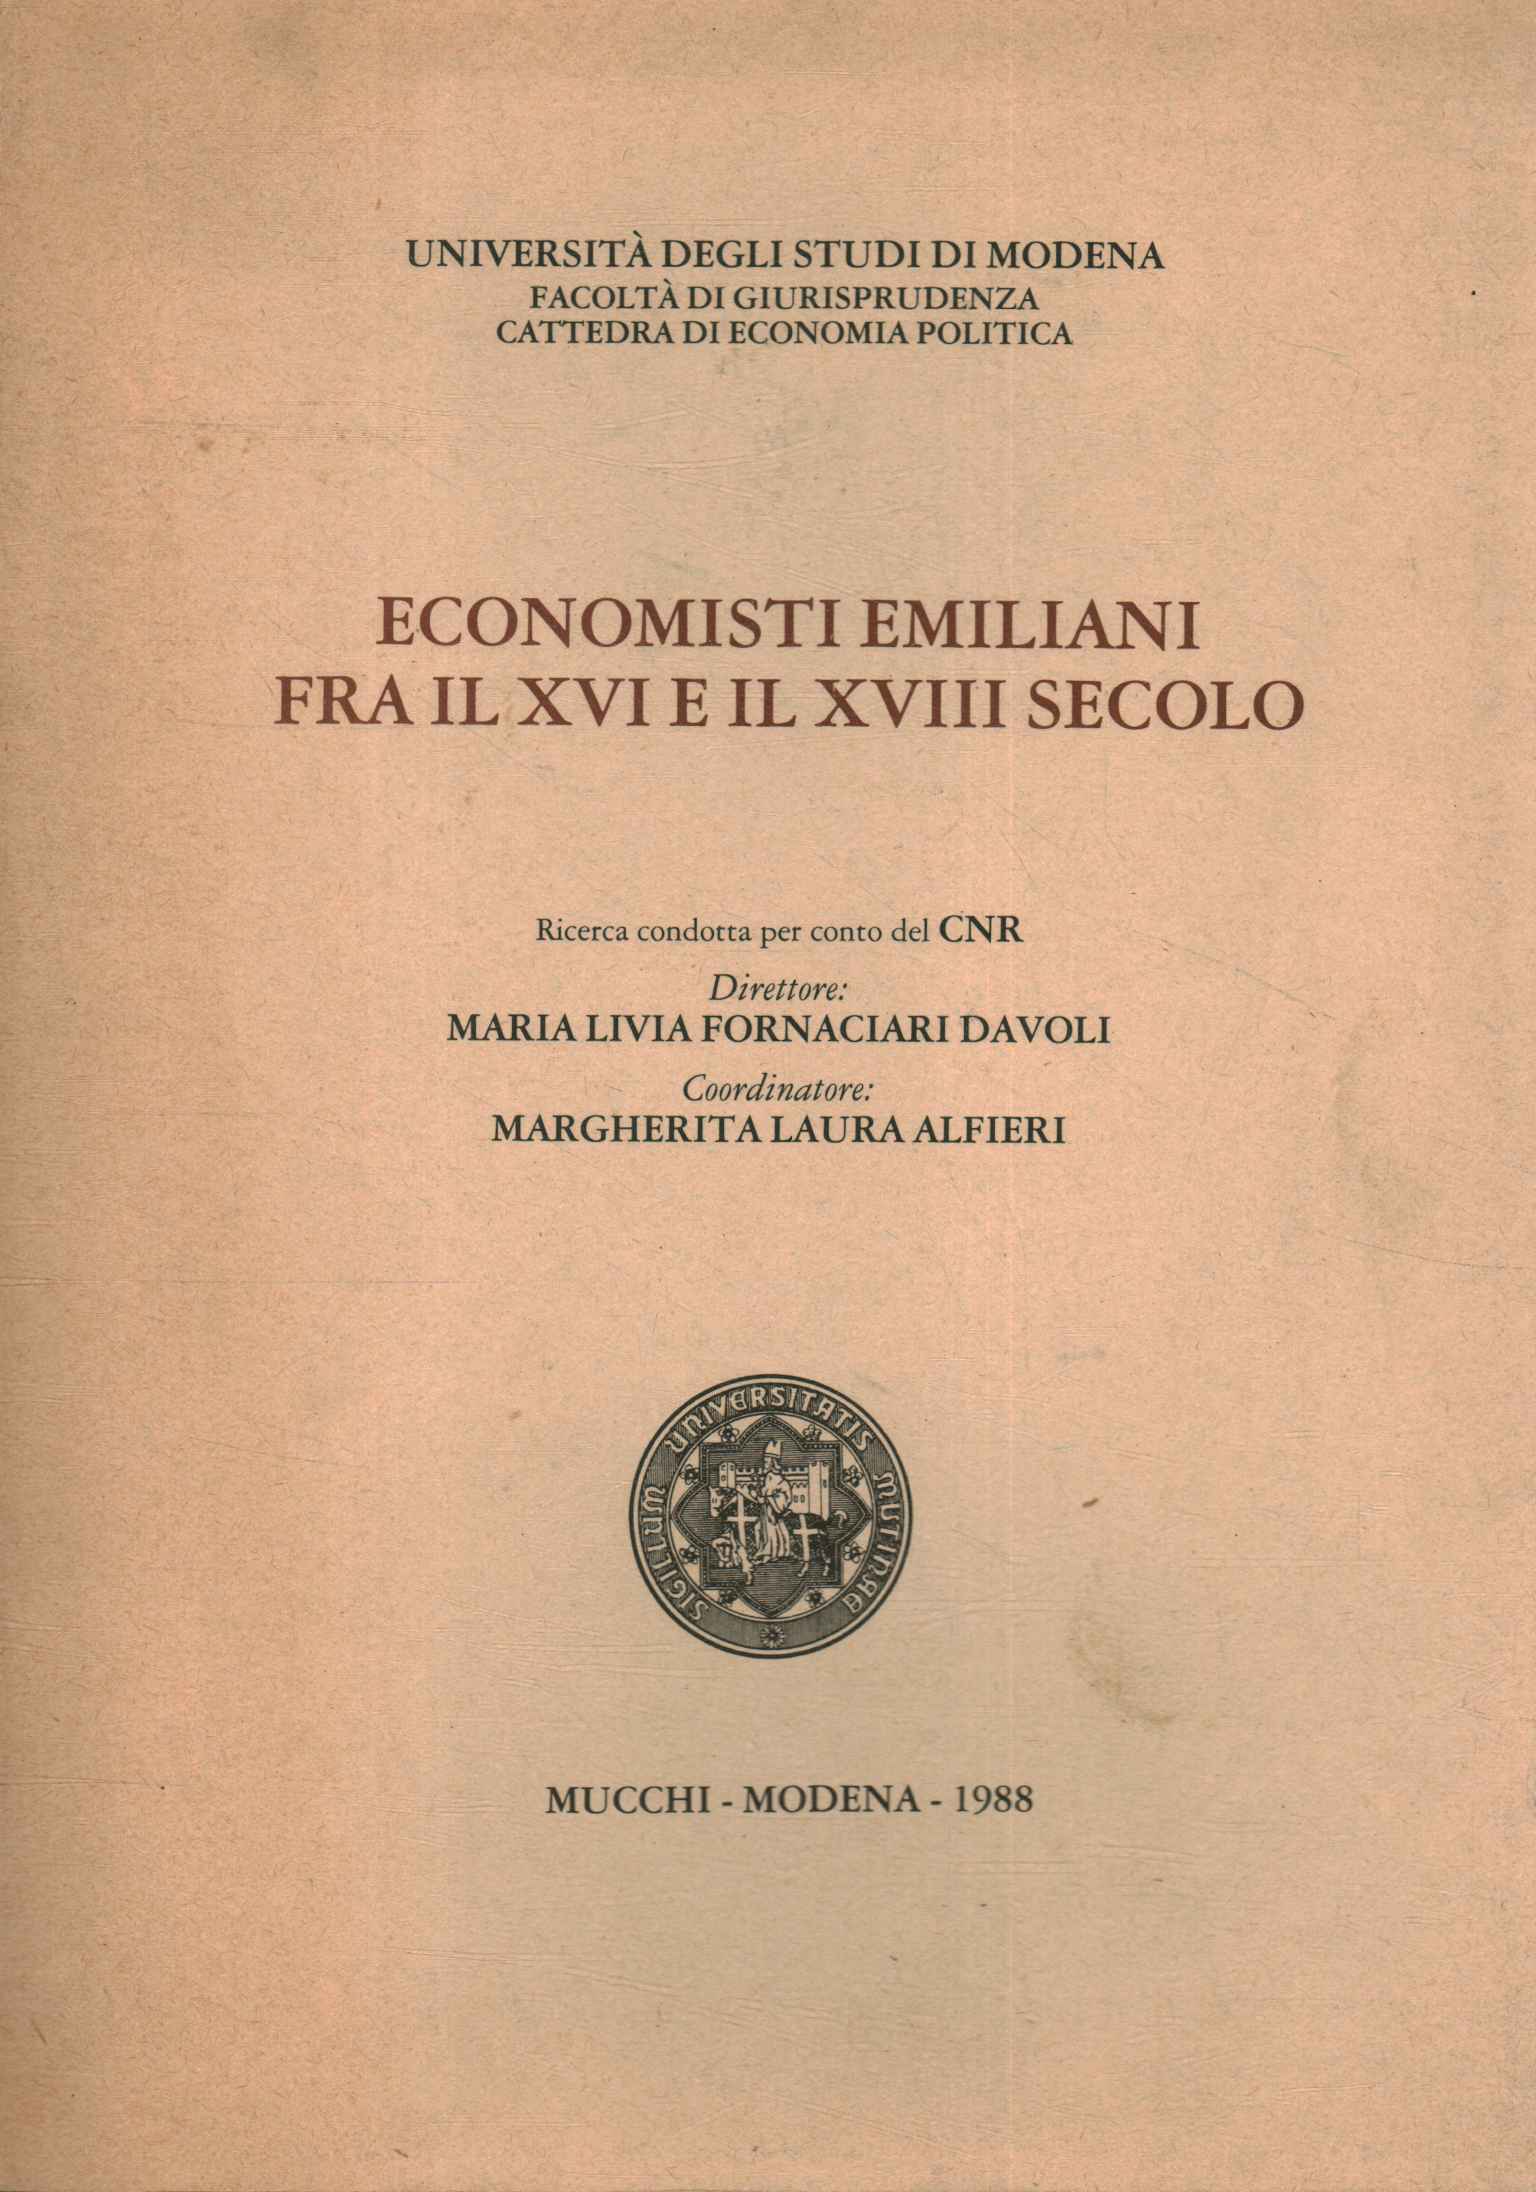 Emilian economists between the 16th and 16th centuries